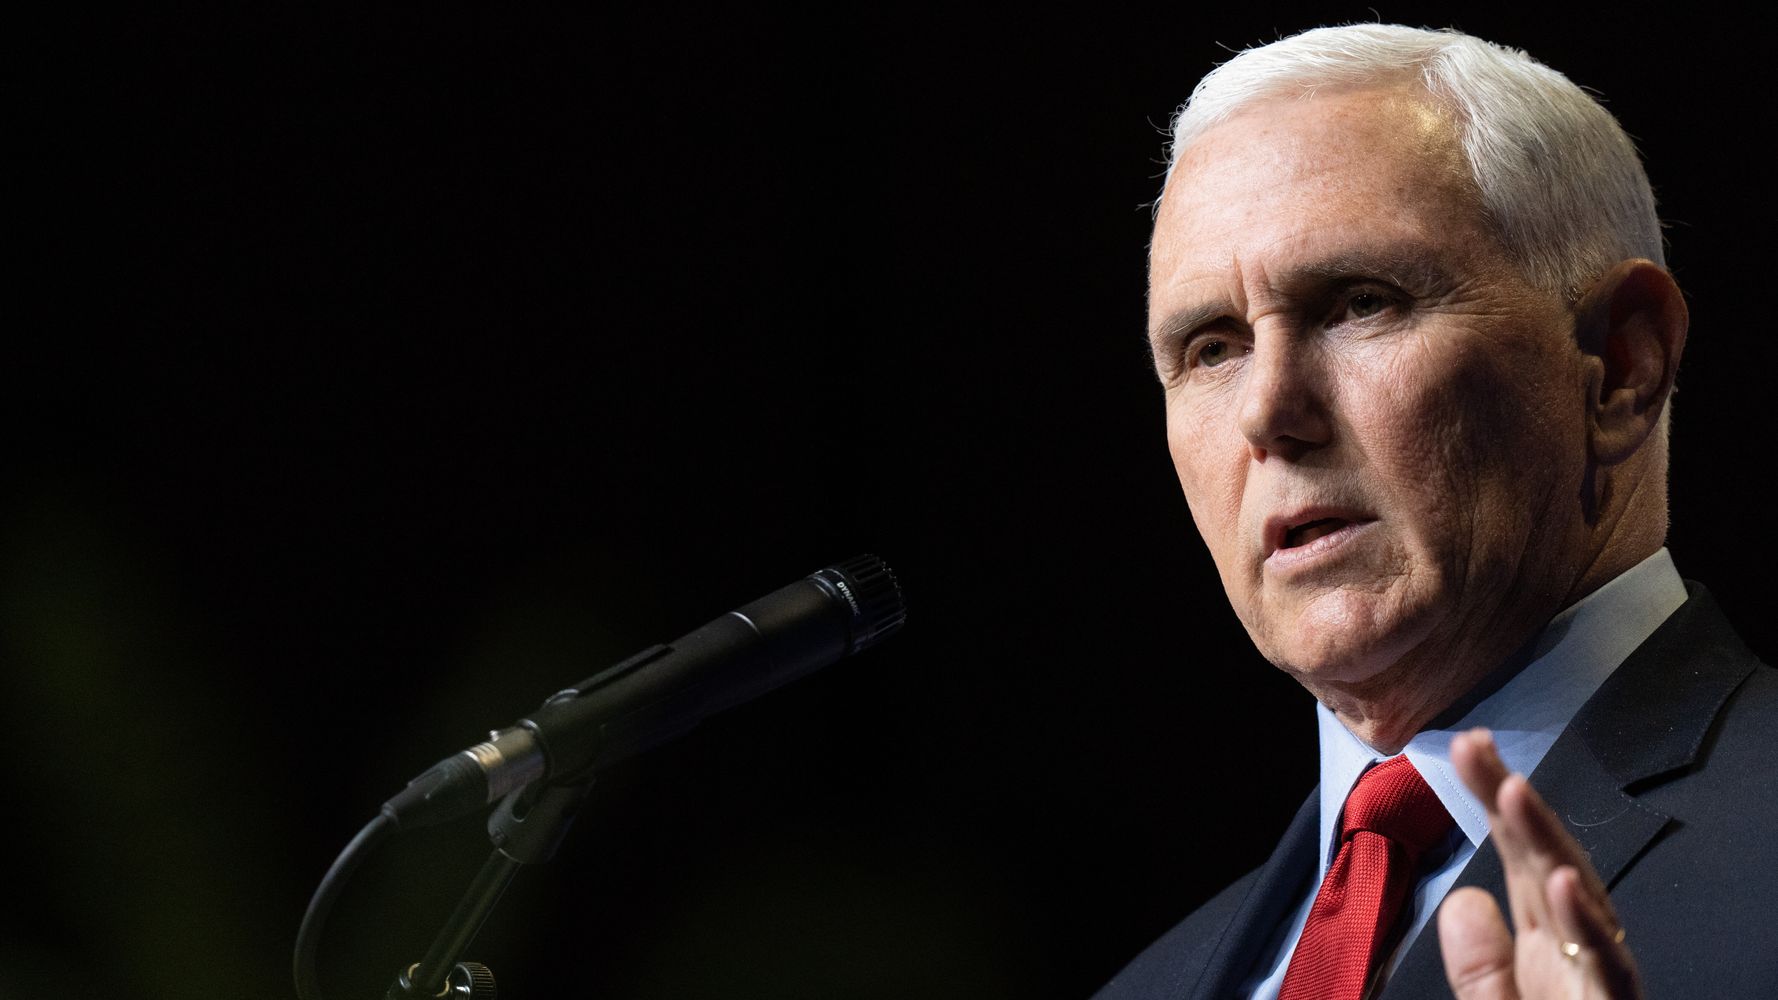 Pence Acknowledges His Break With Trump Over Jan. 6 But Still Does Not Blame Him